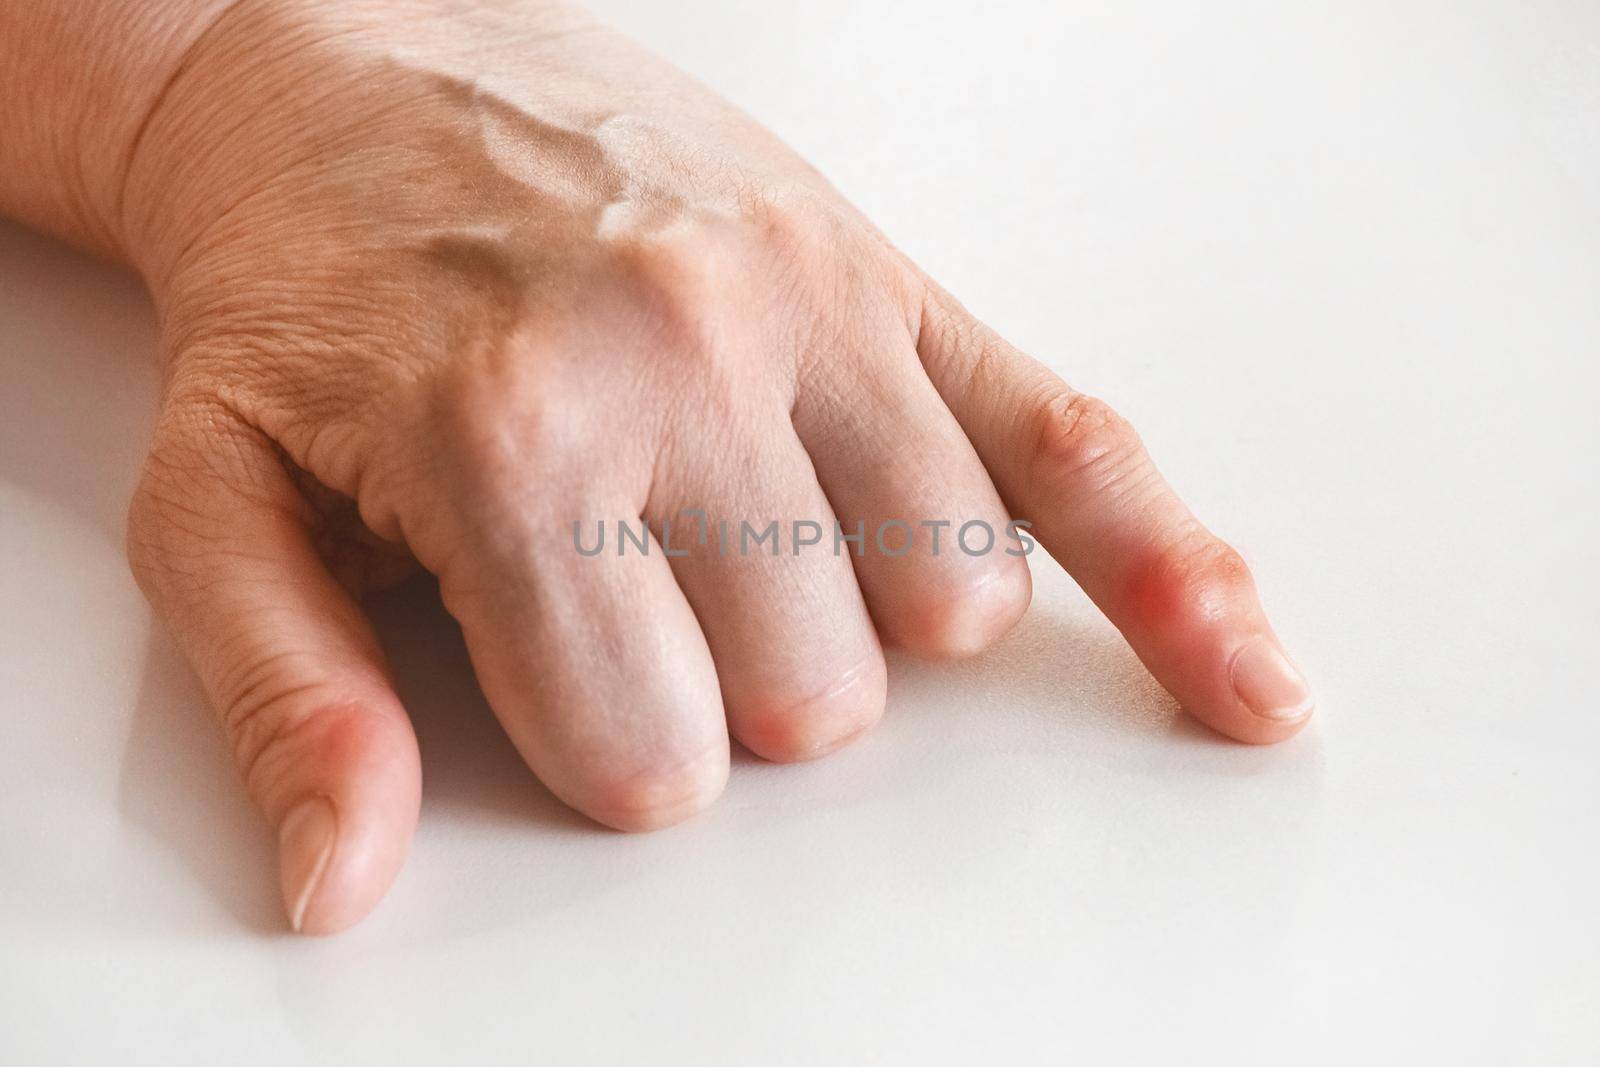 The hand of an elderly woman with hand rheumatism and a change in joints close-up.